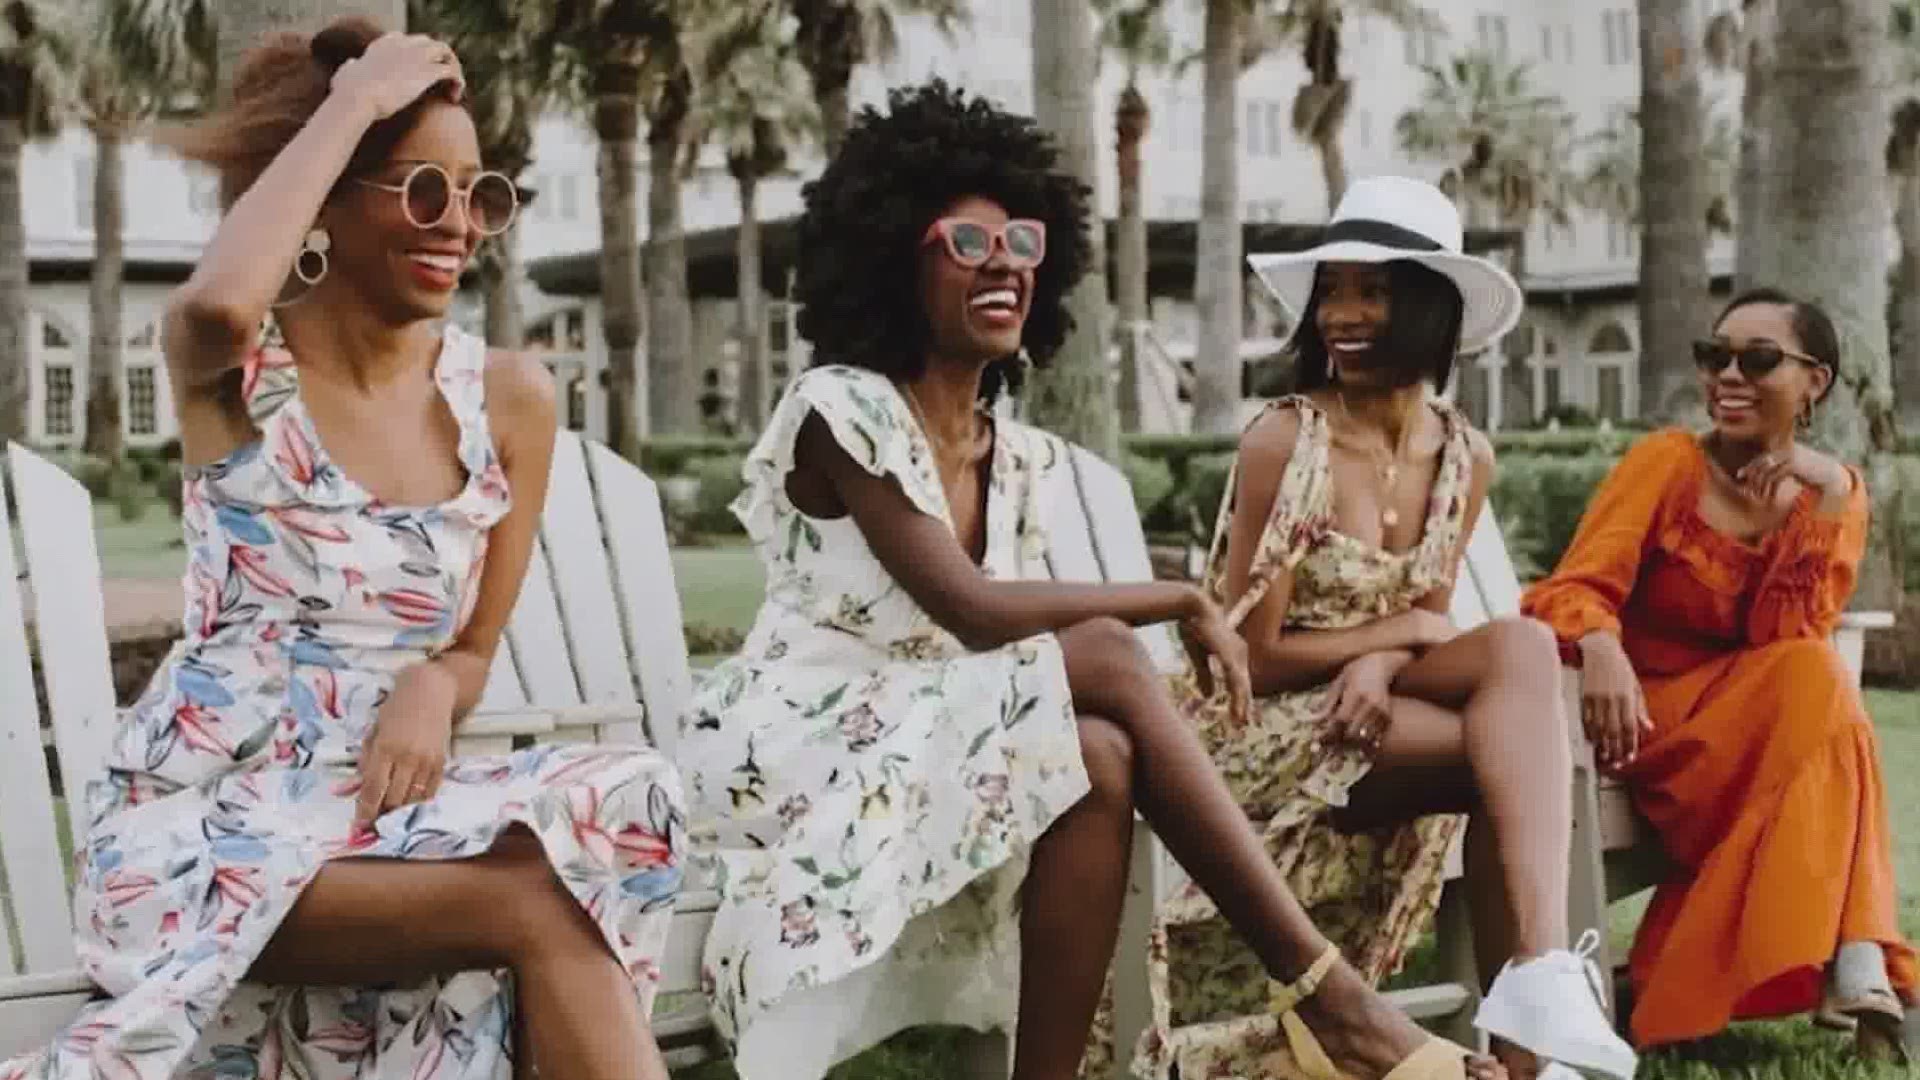 In celebration of Black History Month, KHOU 11 spoke with 4 Houston women sparking change in the fashion world with their brand Influencing in Color.